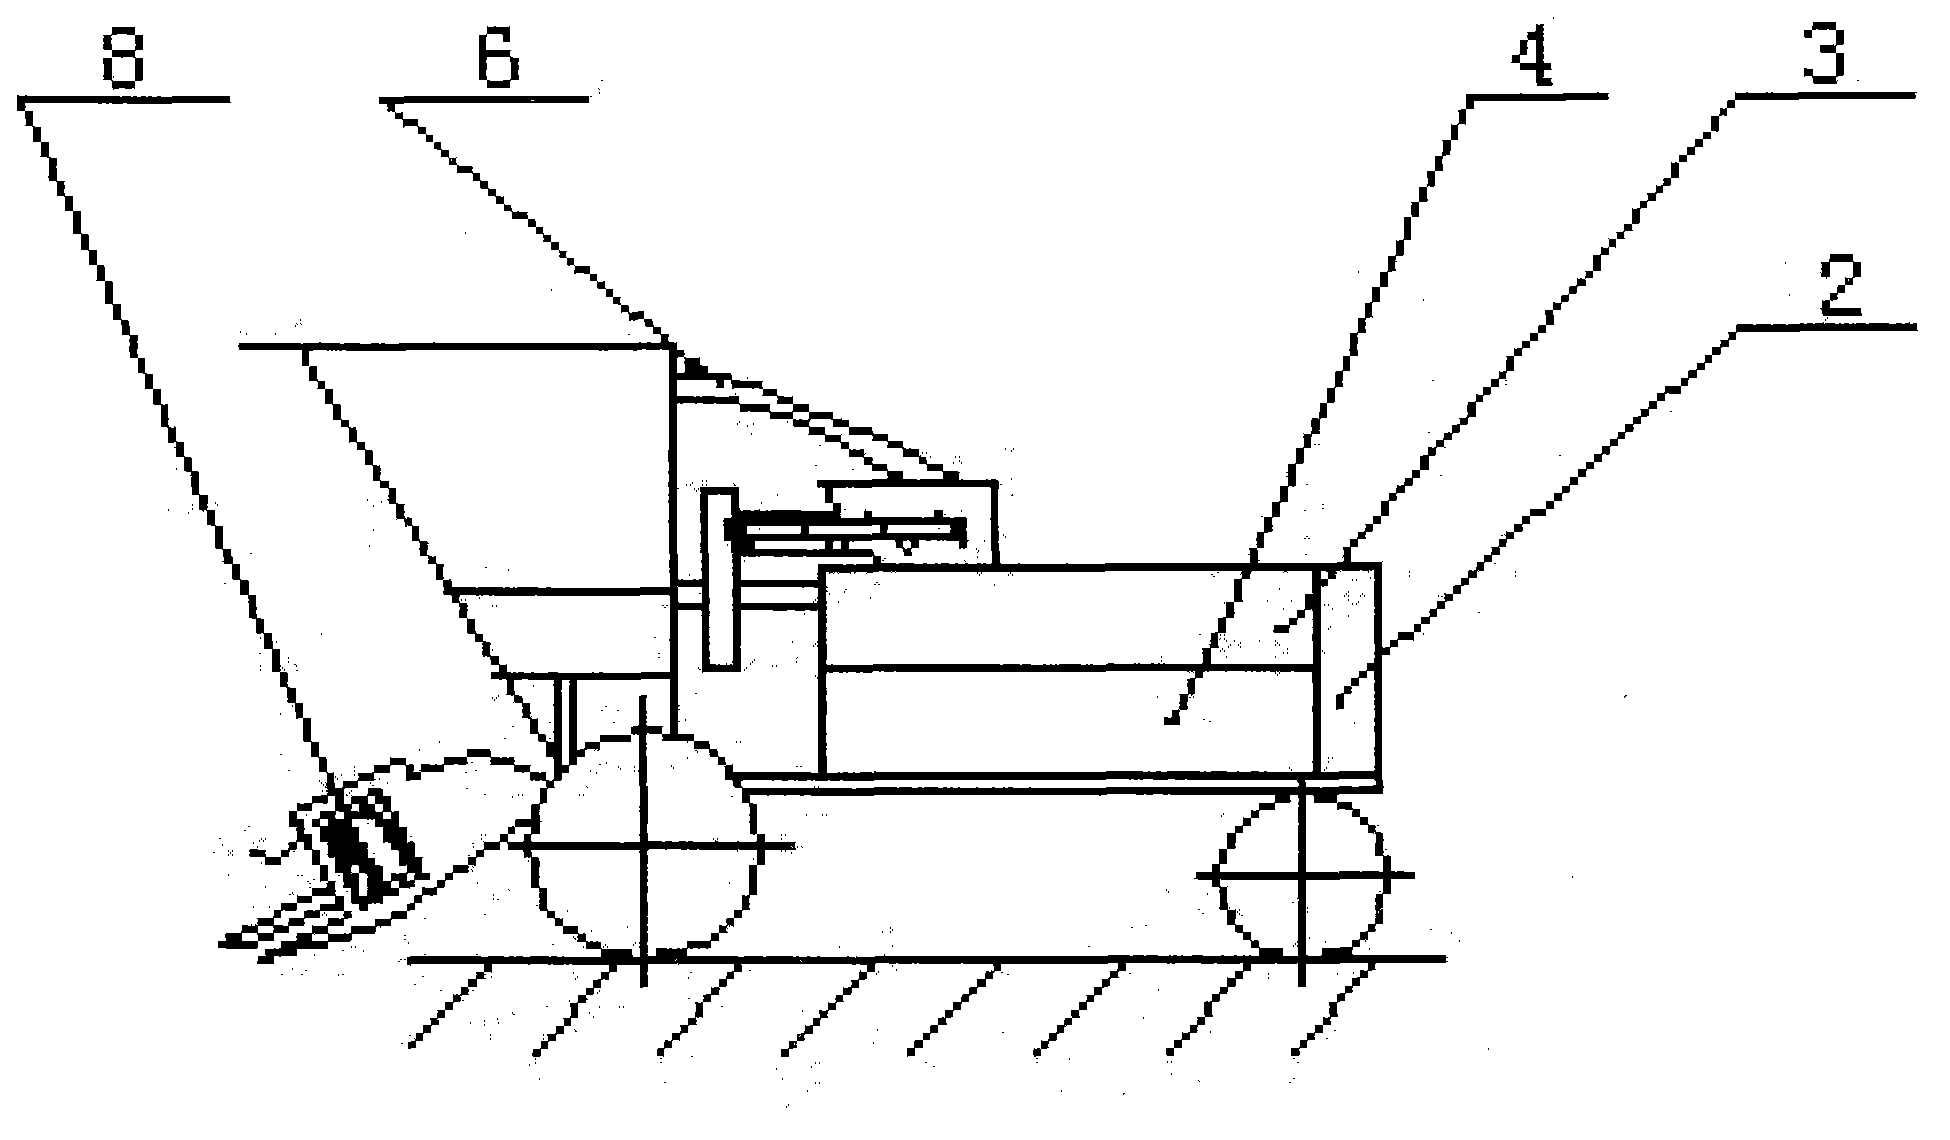 Self-propelled combine corn harvester for harvesting spike or seed, collecting straws and juicing